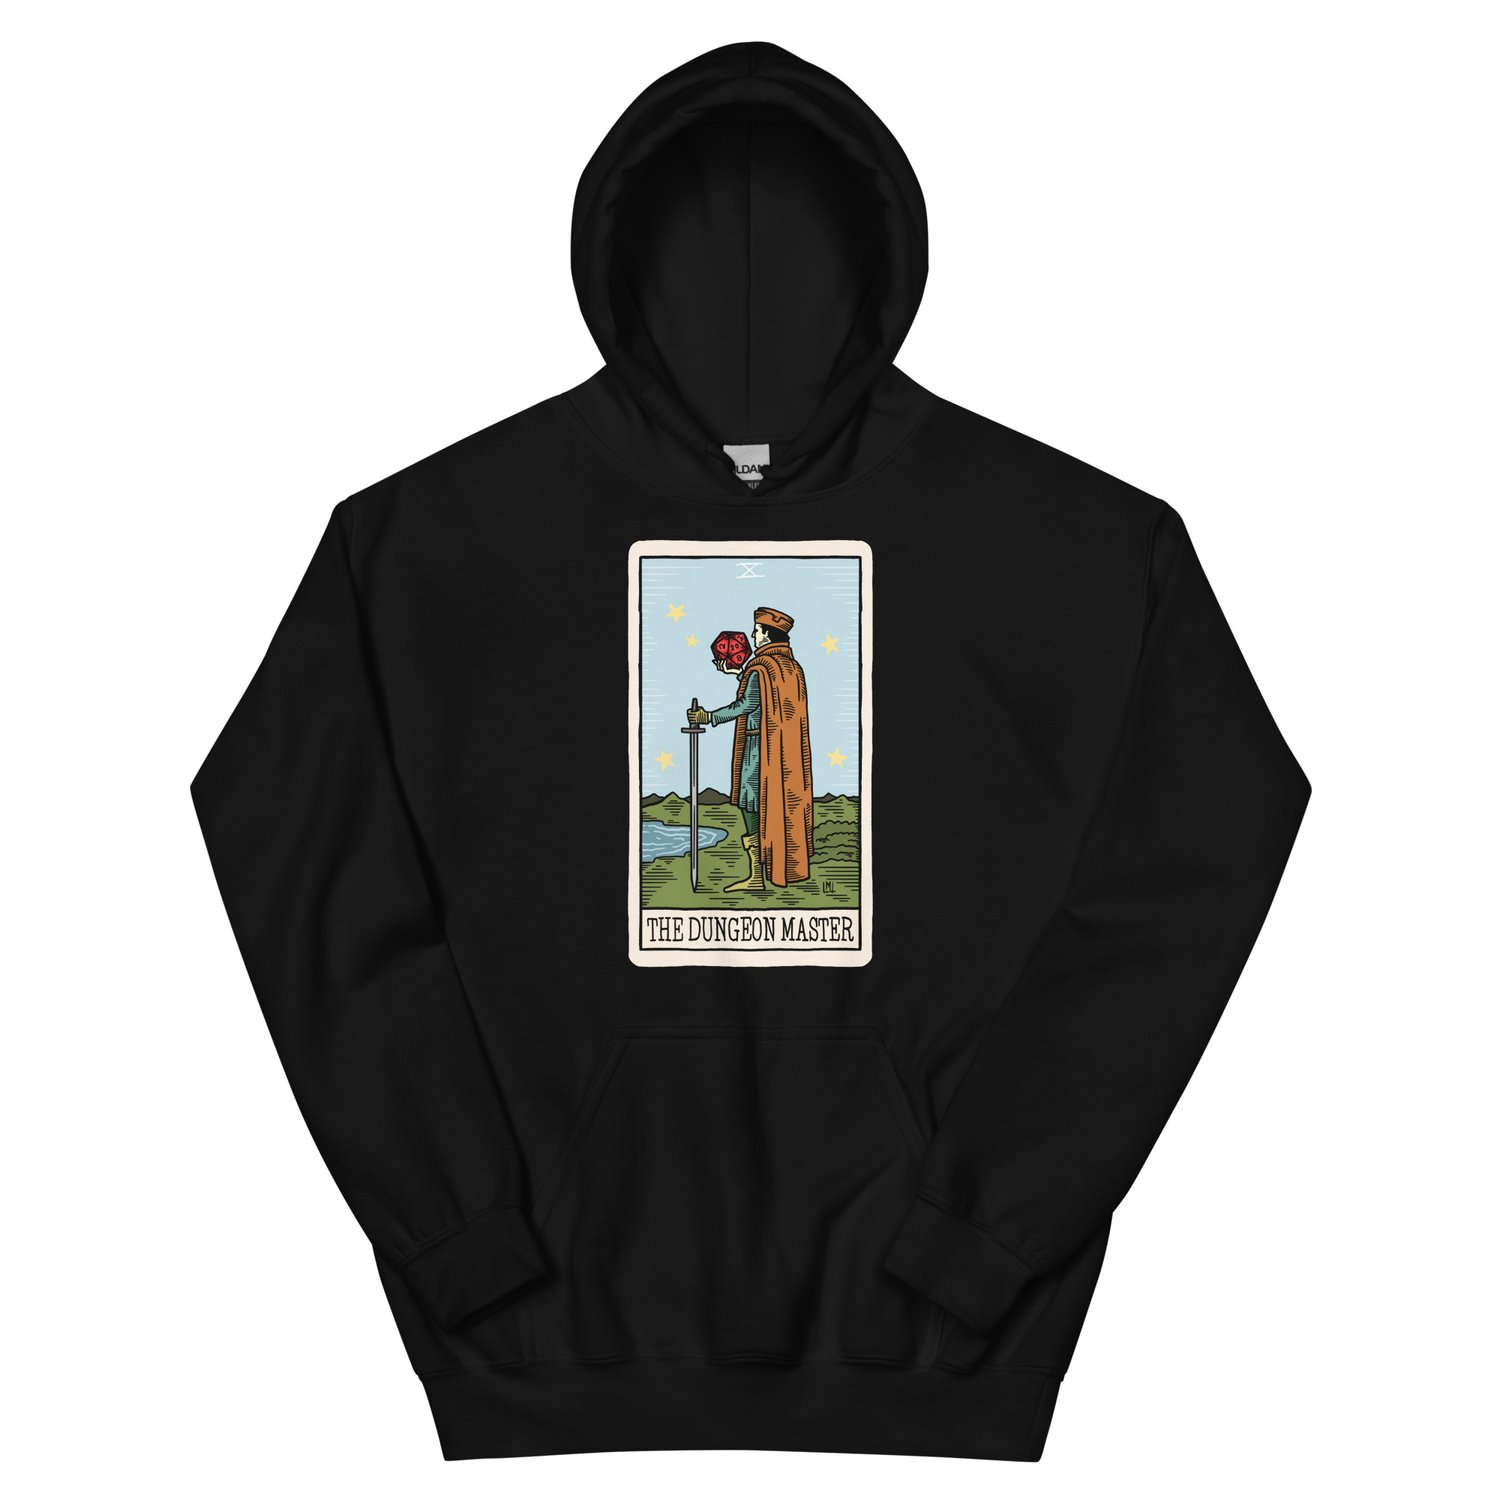 Image of Dungeon Master hoodie